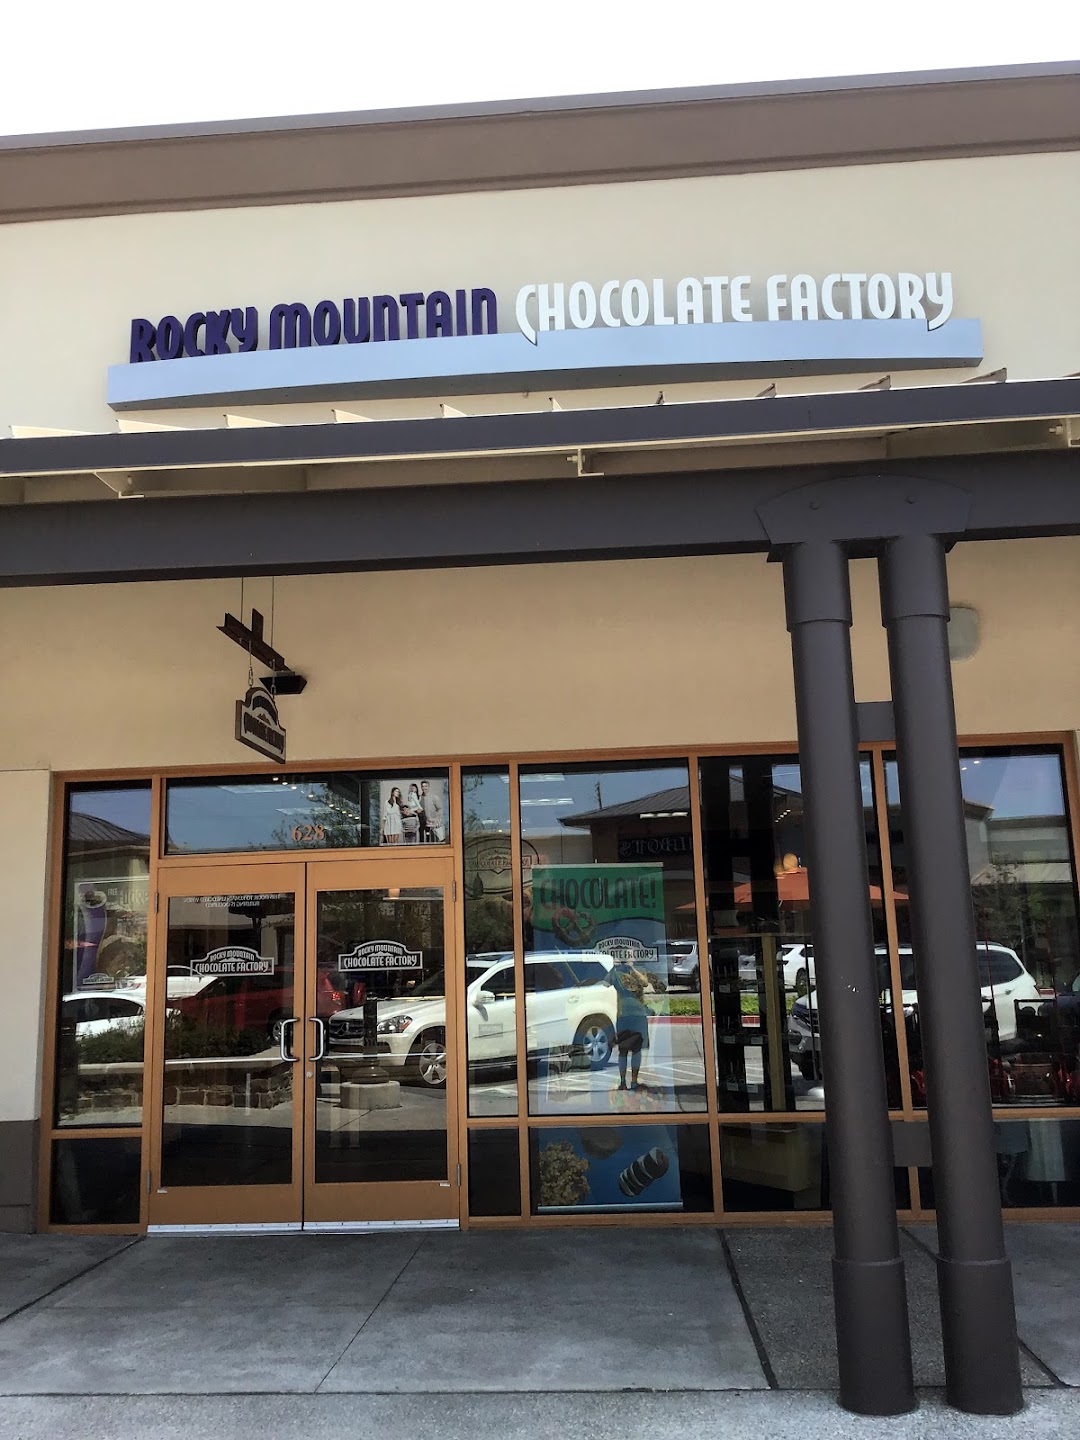 The Rocky Mountain Chocolate Factory